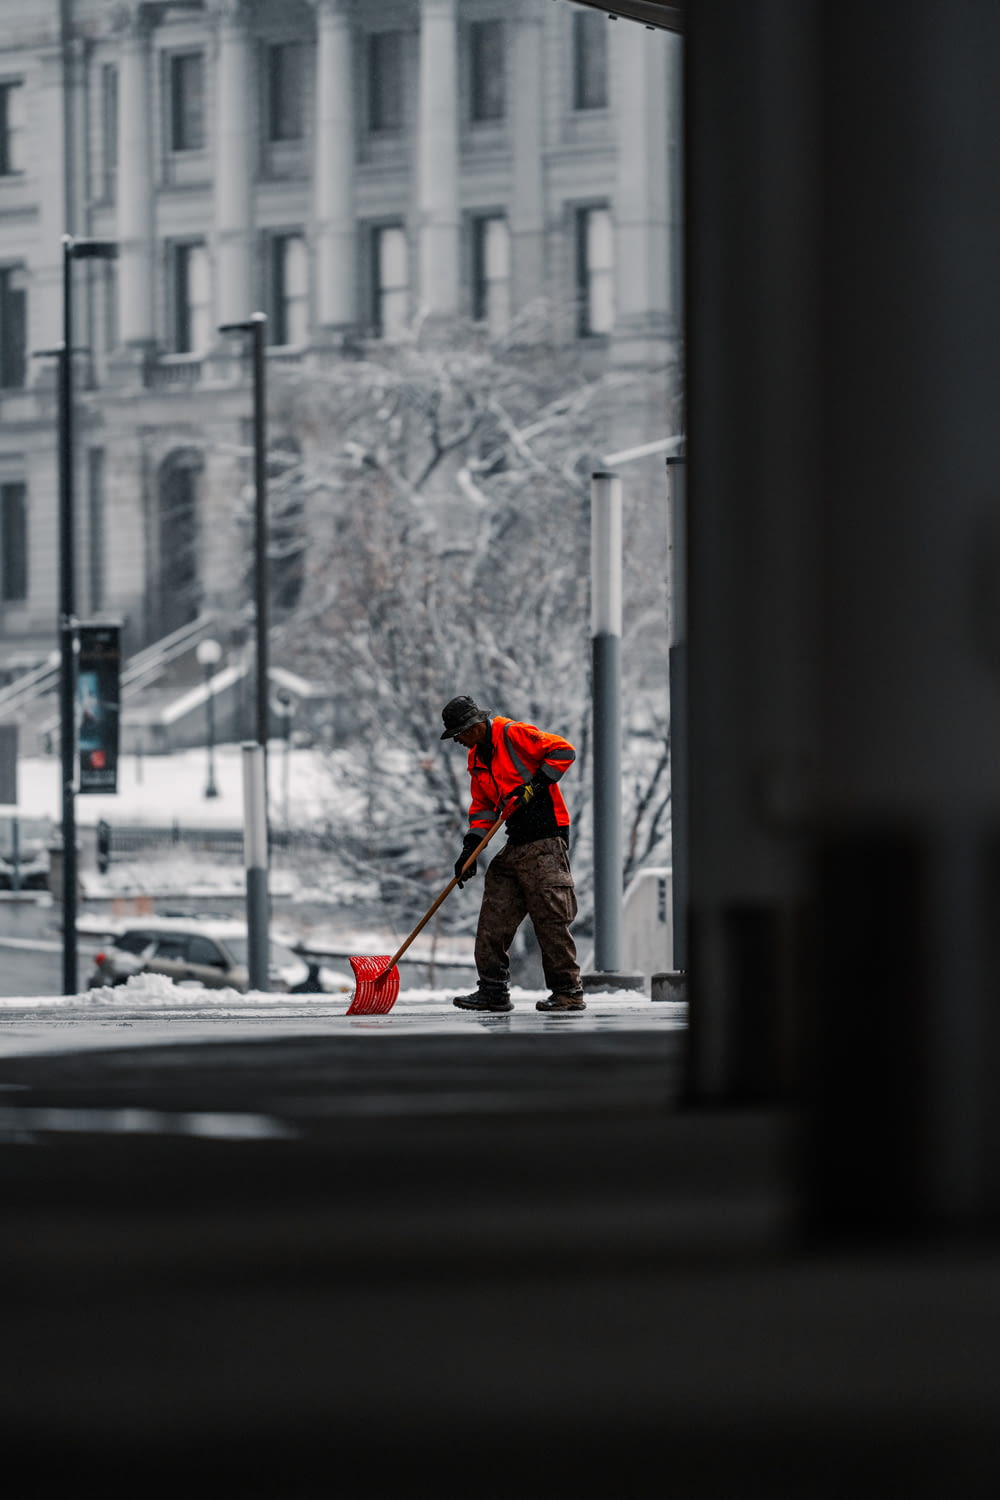 a man sweeping the street with a broom